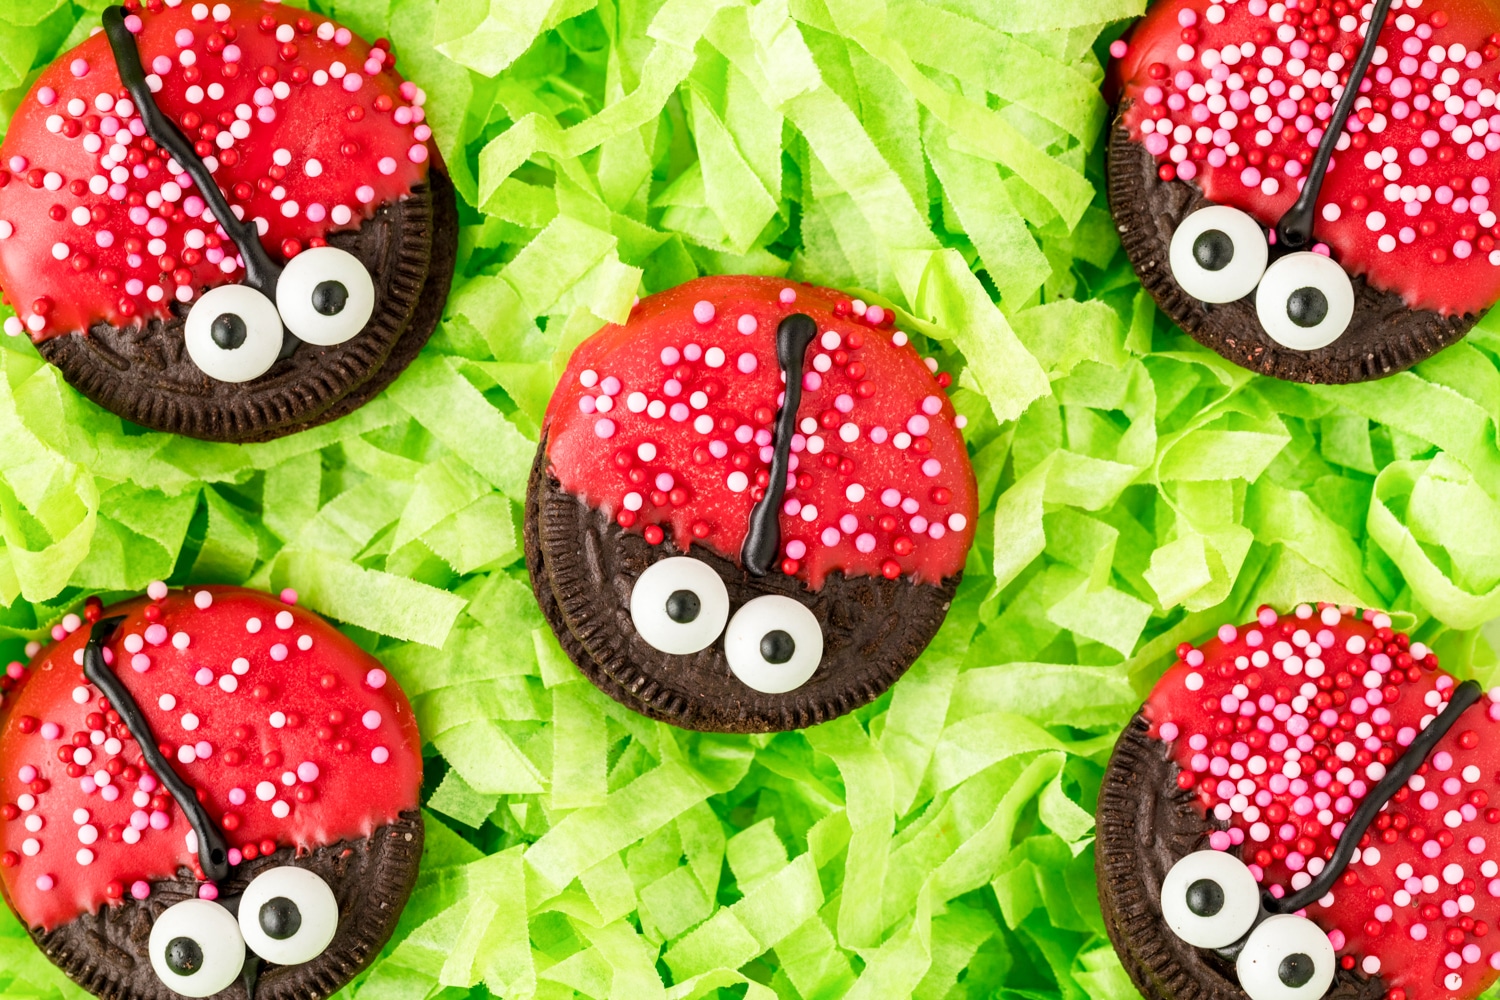 Ladybug Cookies arranged on green crinkle paper for a festive tasty treat